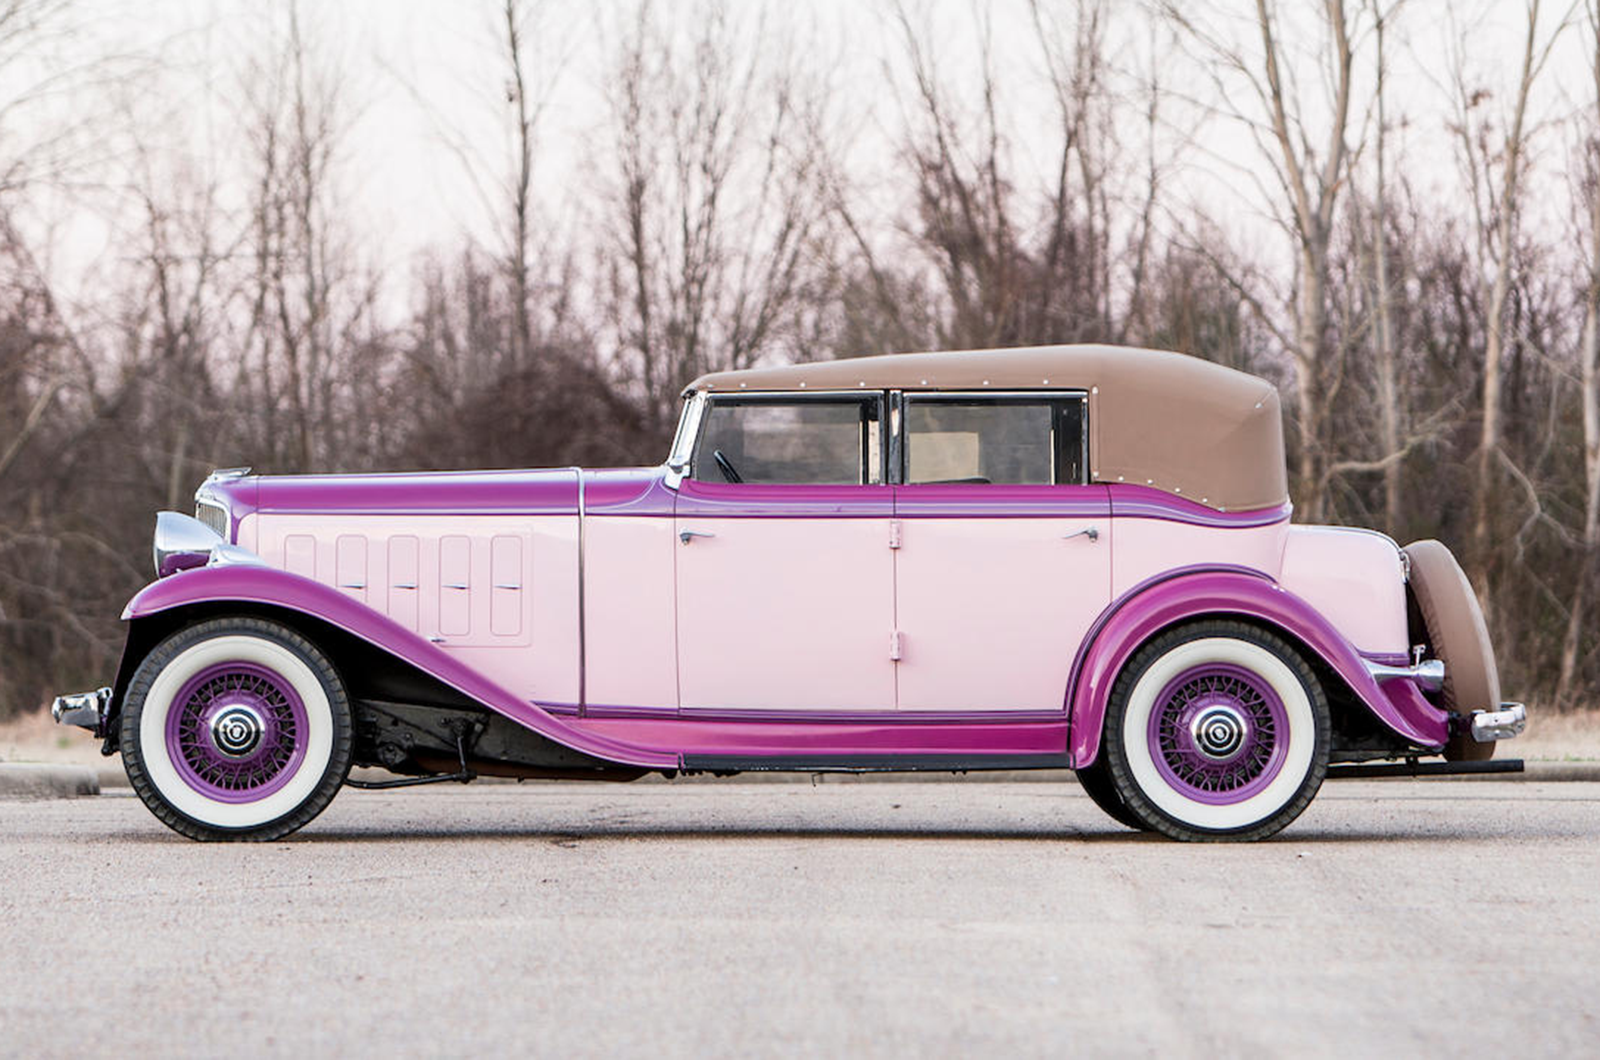 Classic & Sports Car – $2m Tucker on top in Tupelo museum charity sale